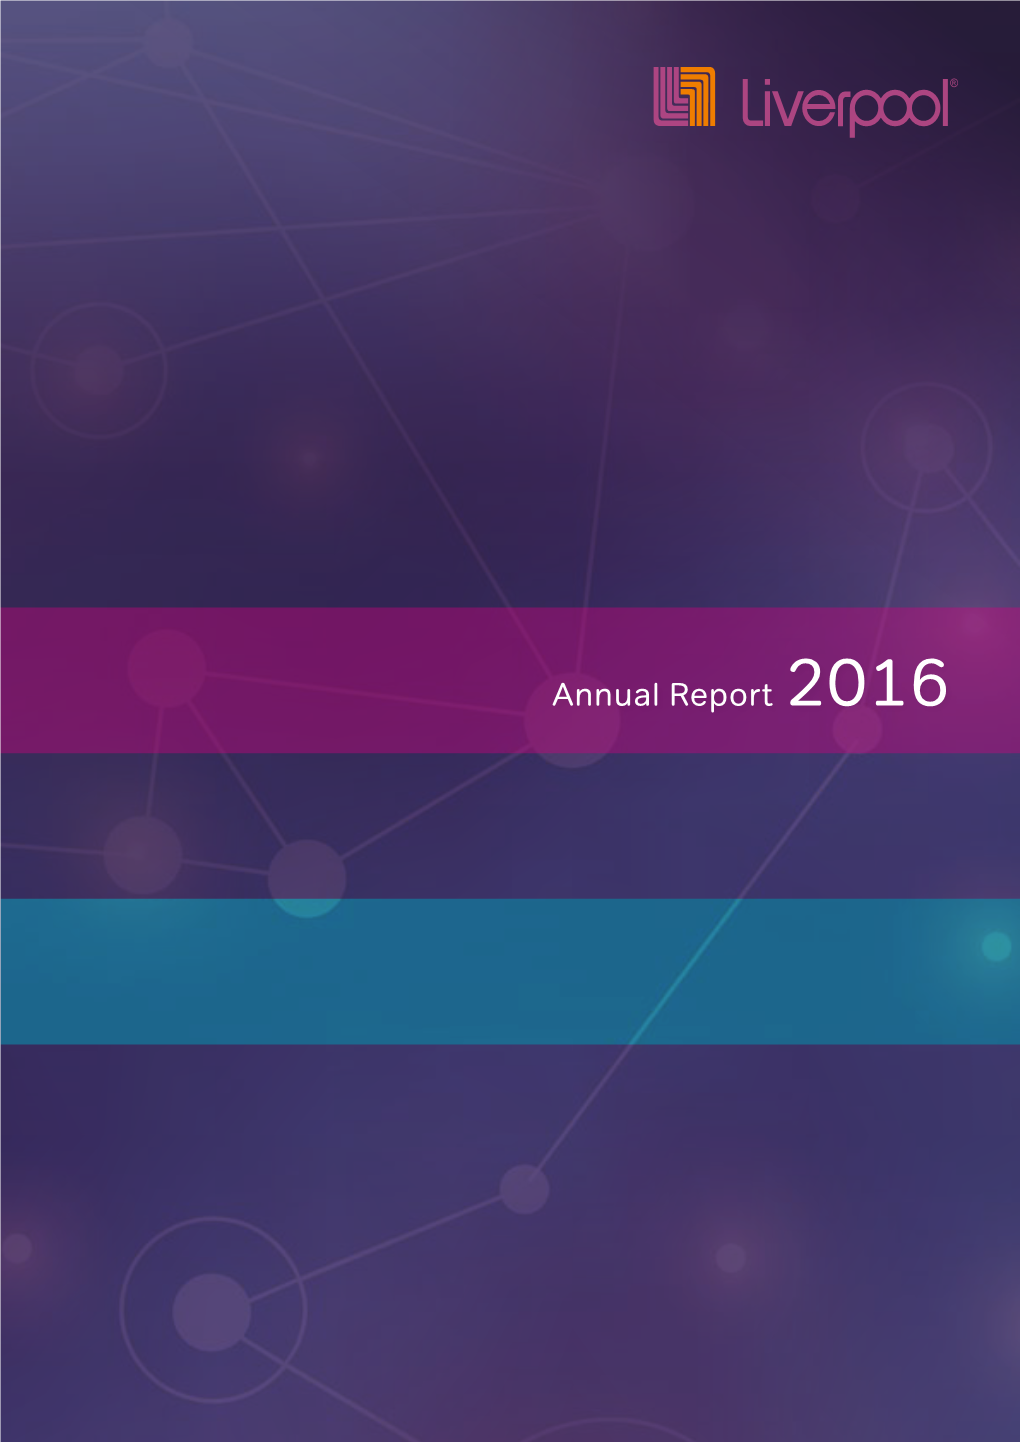 Annual Report 2016 Transformational Times Liverpool Tampico